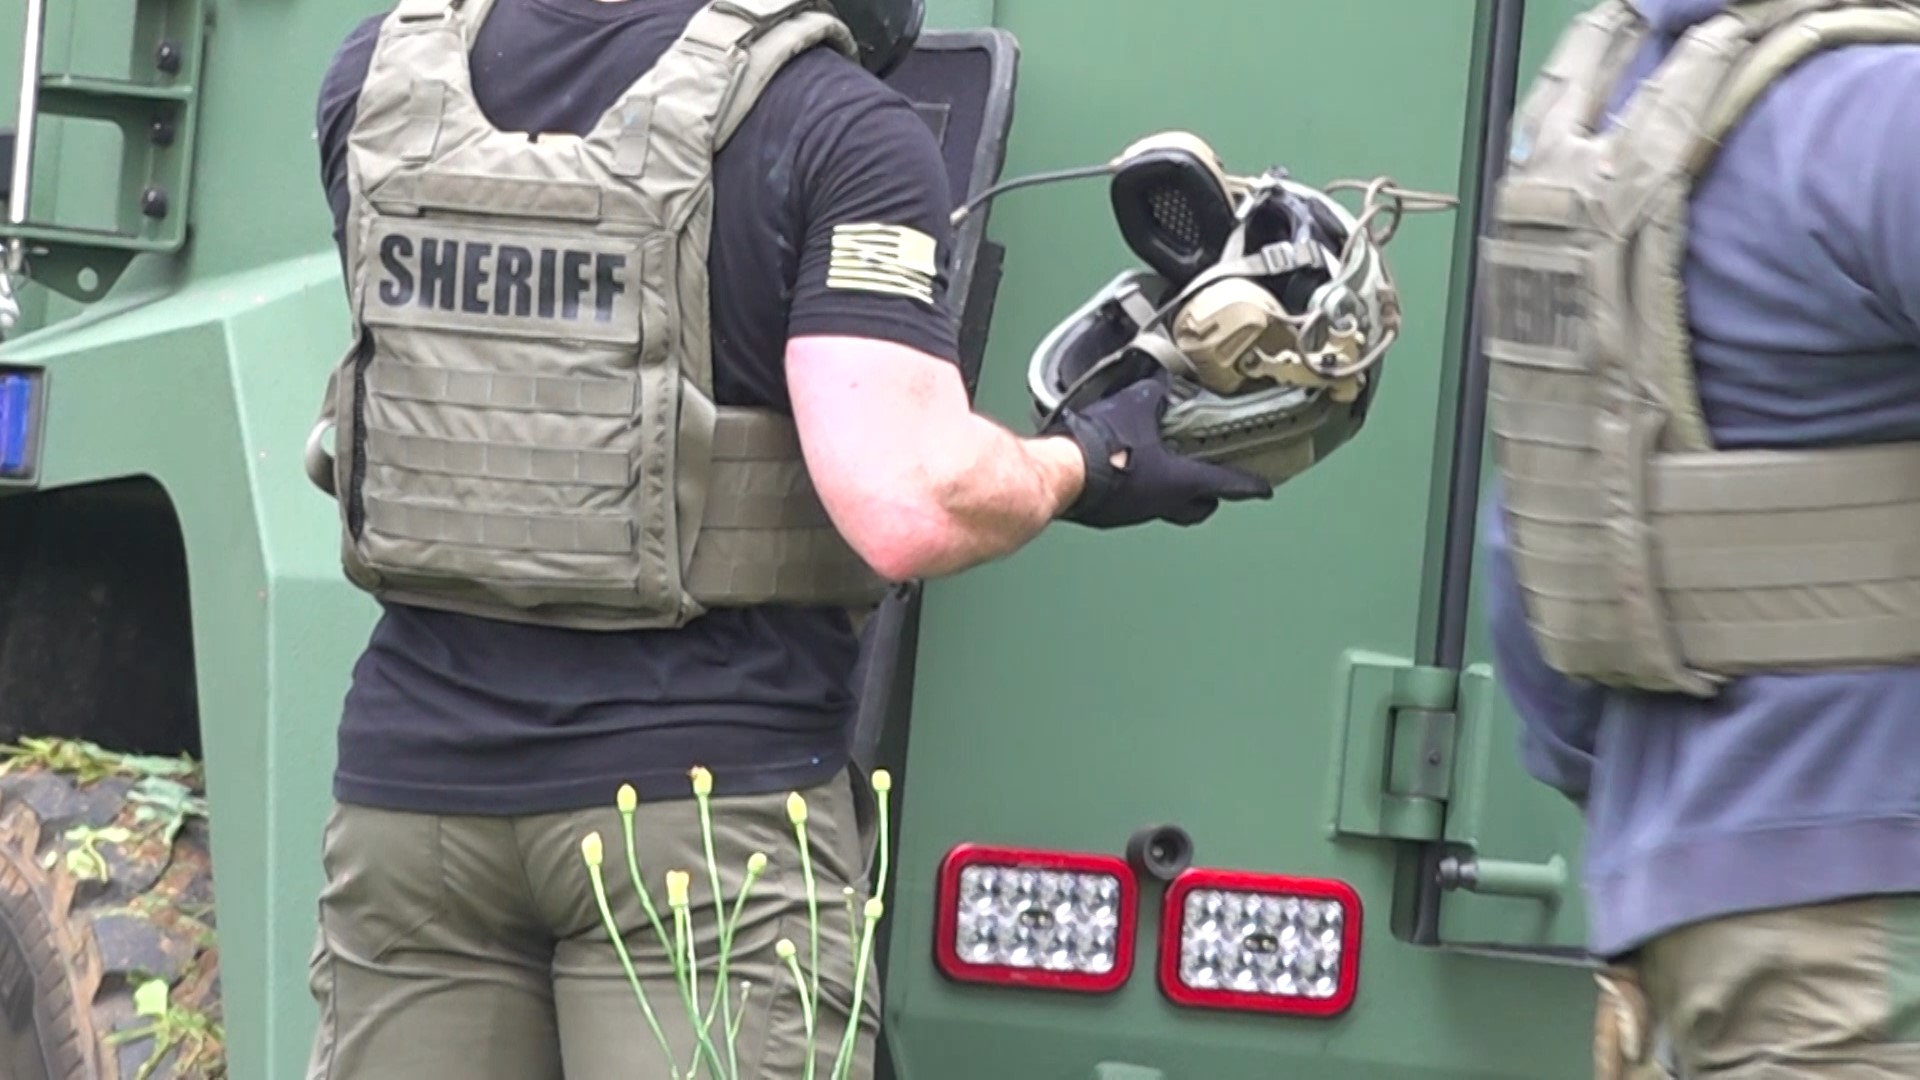 With more mass shootings across the United States, local agencies believe tactical training is more critical than ever in keeping the public safe.